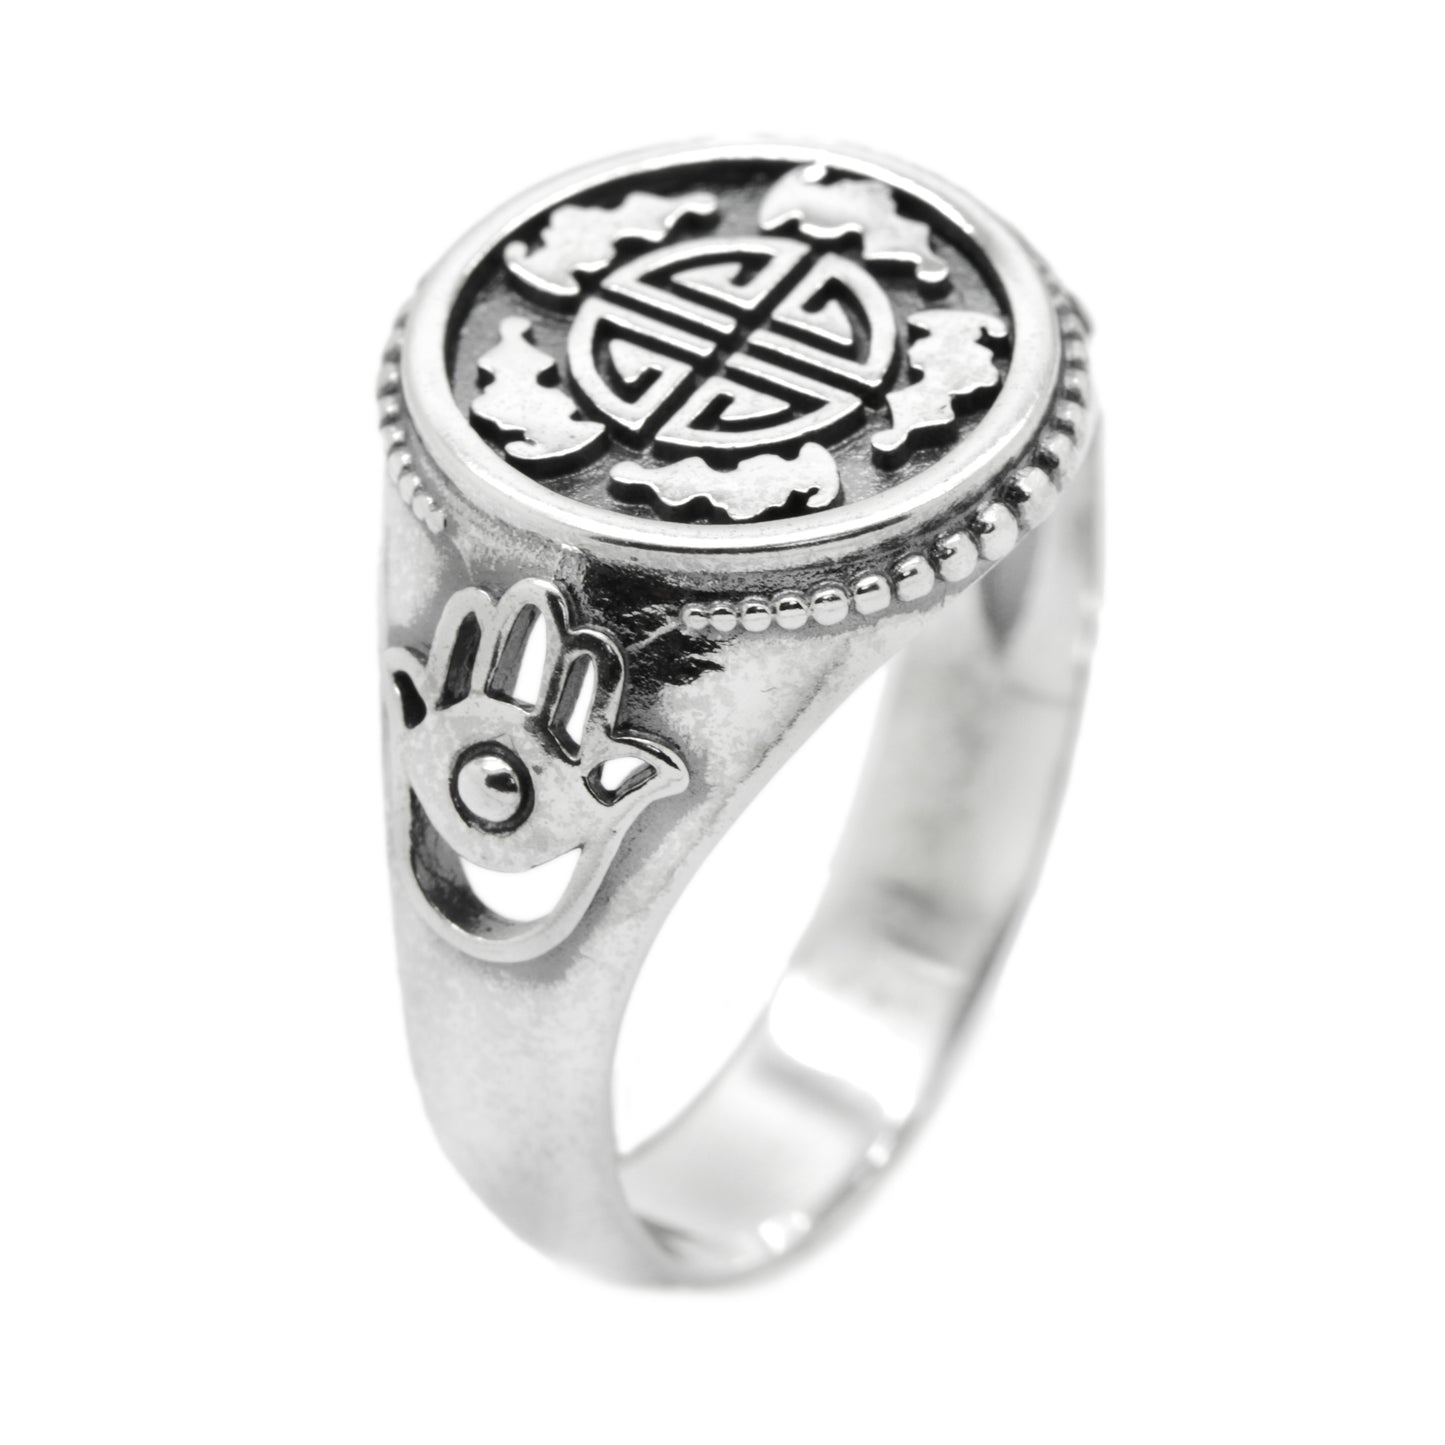 Wufu Five Blessings Five Happiness Chinese Culture Symbols and Hamsa Ring